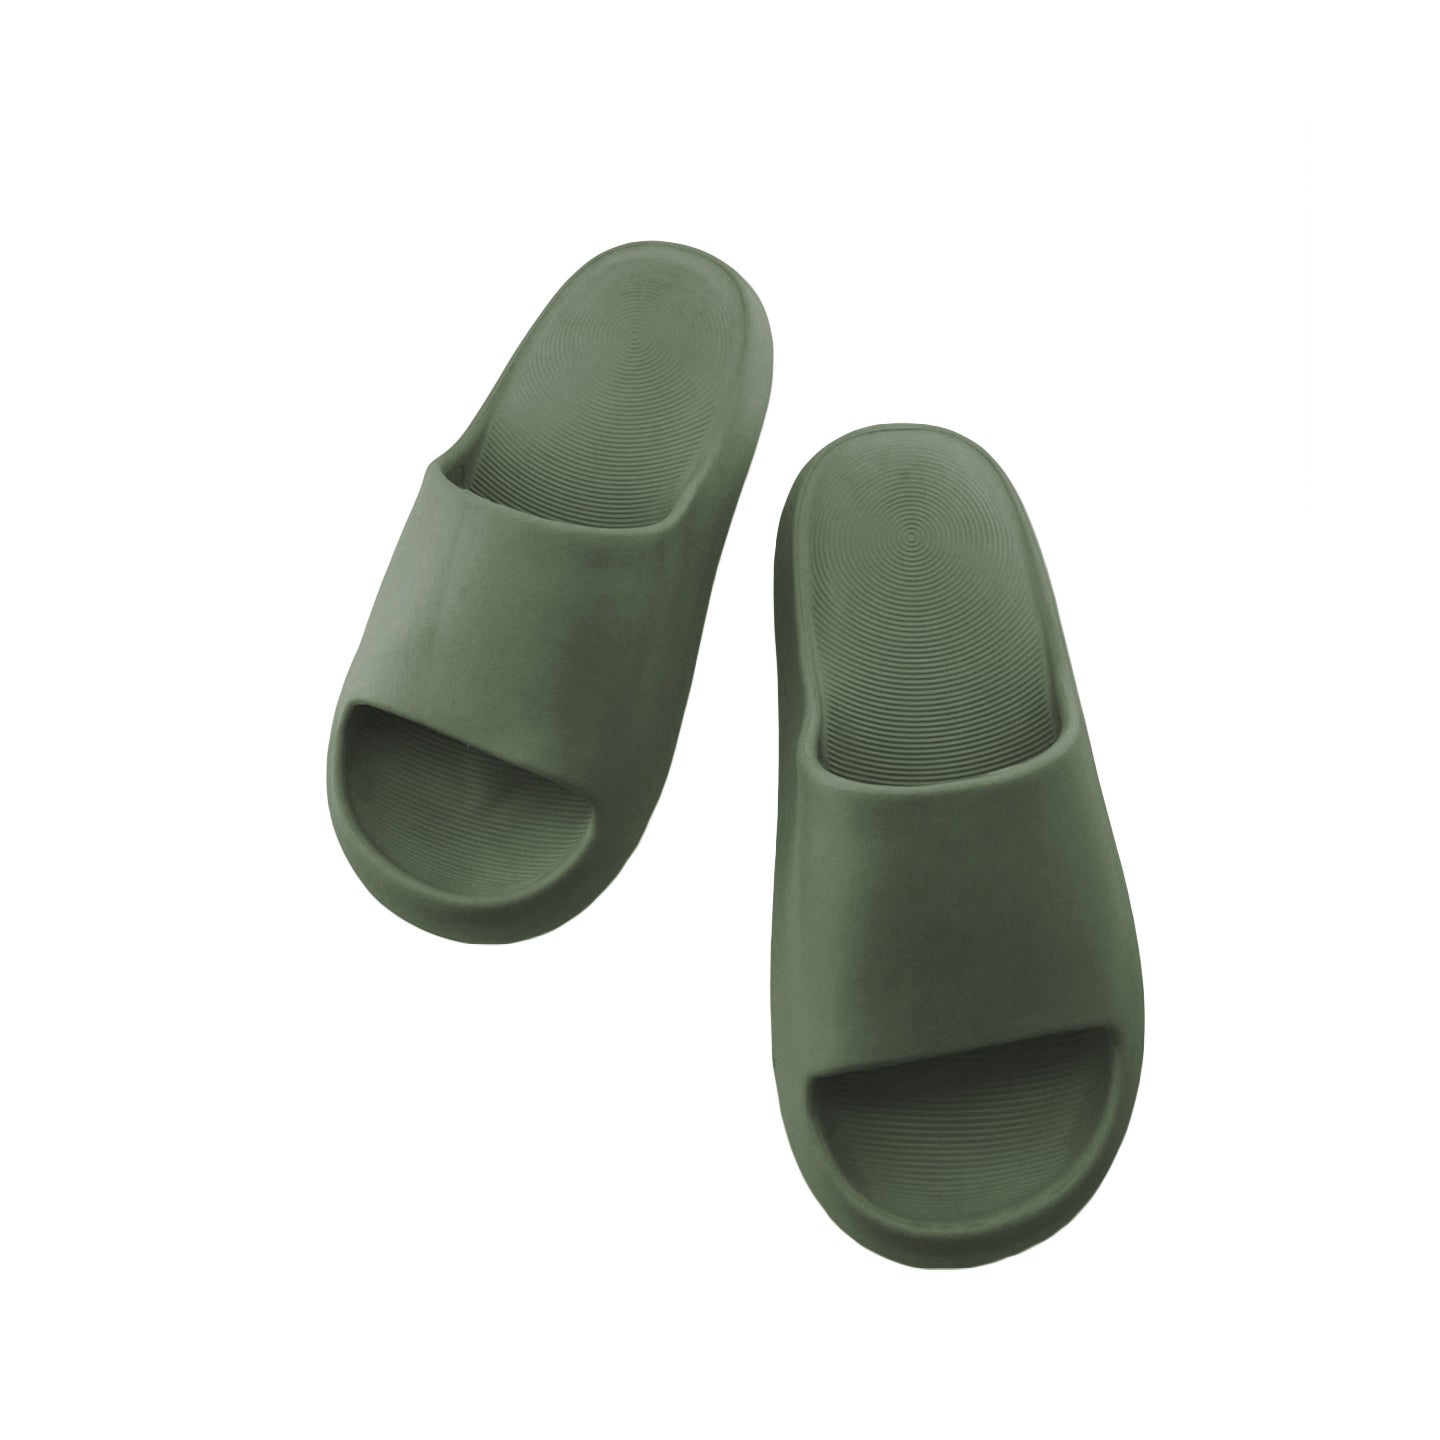 MINISO MEN'S FASHION CUSHIONED THICK SLIPPERS(DARK GREEN,41-42) 2013453311119 FASHIONABLE SLIPPERS